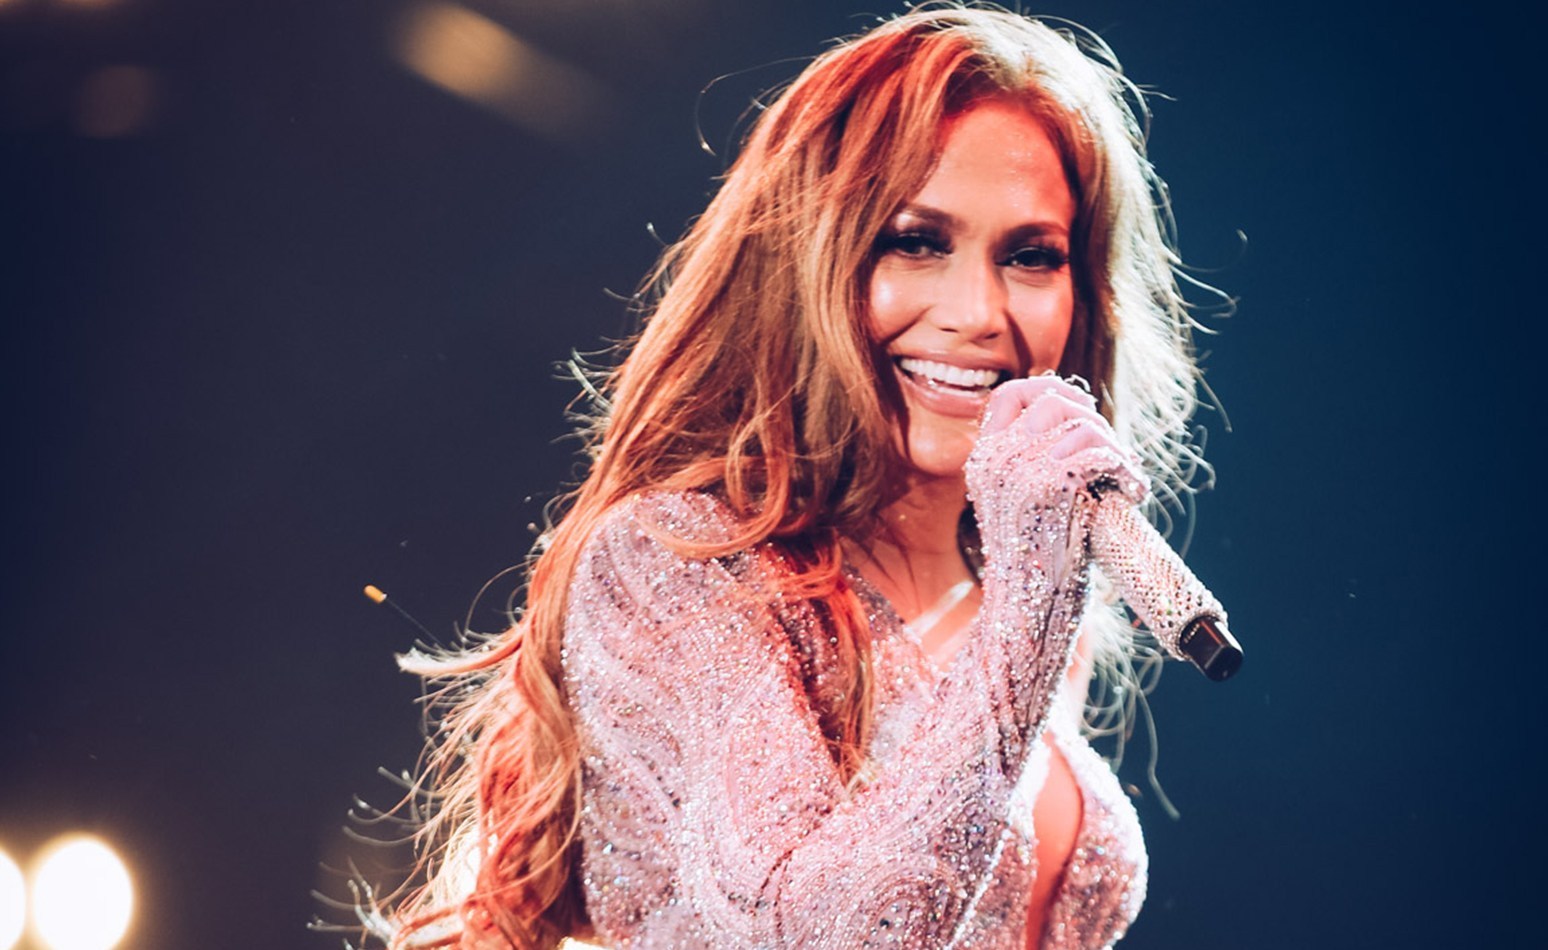 Watch: J-Lo Shares Excitement About Performing in Egypt